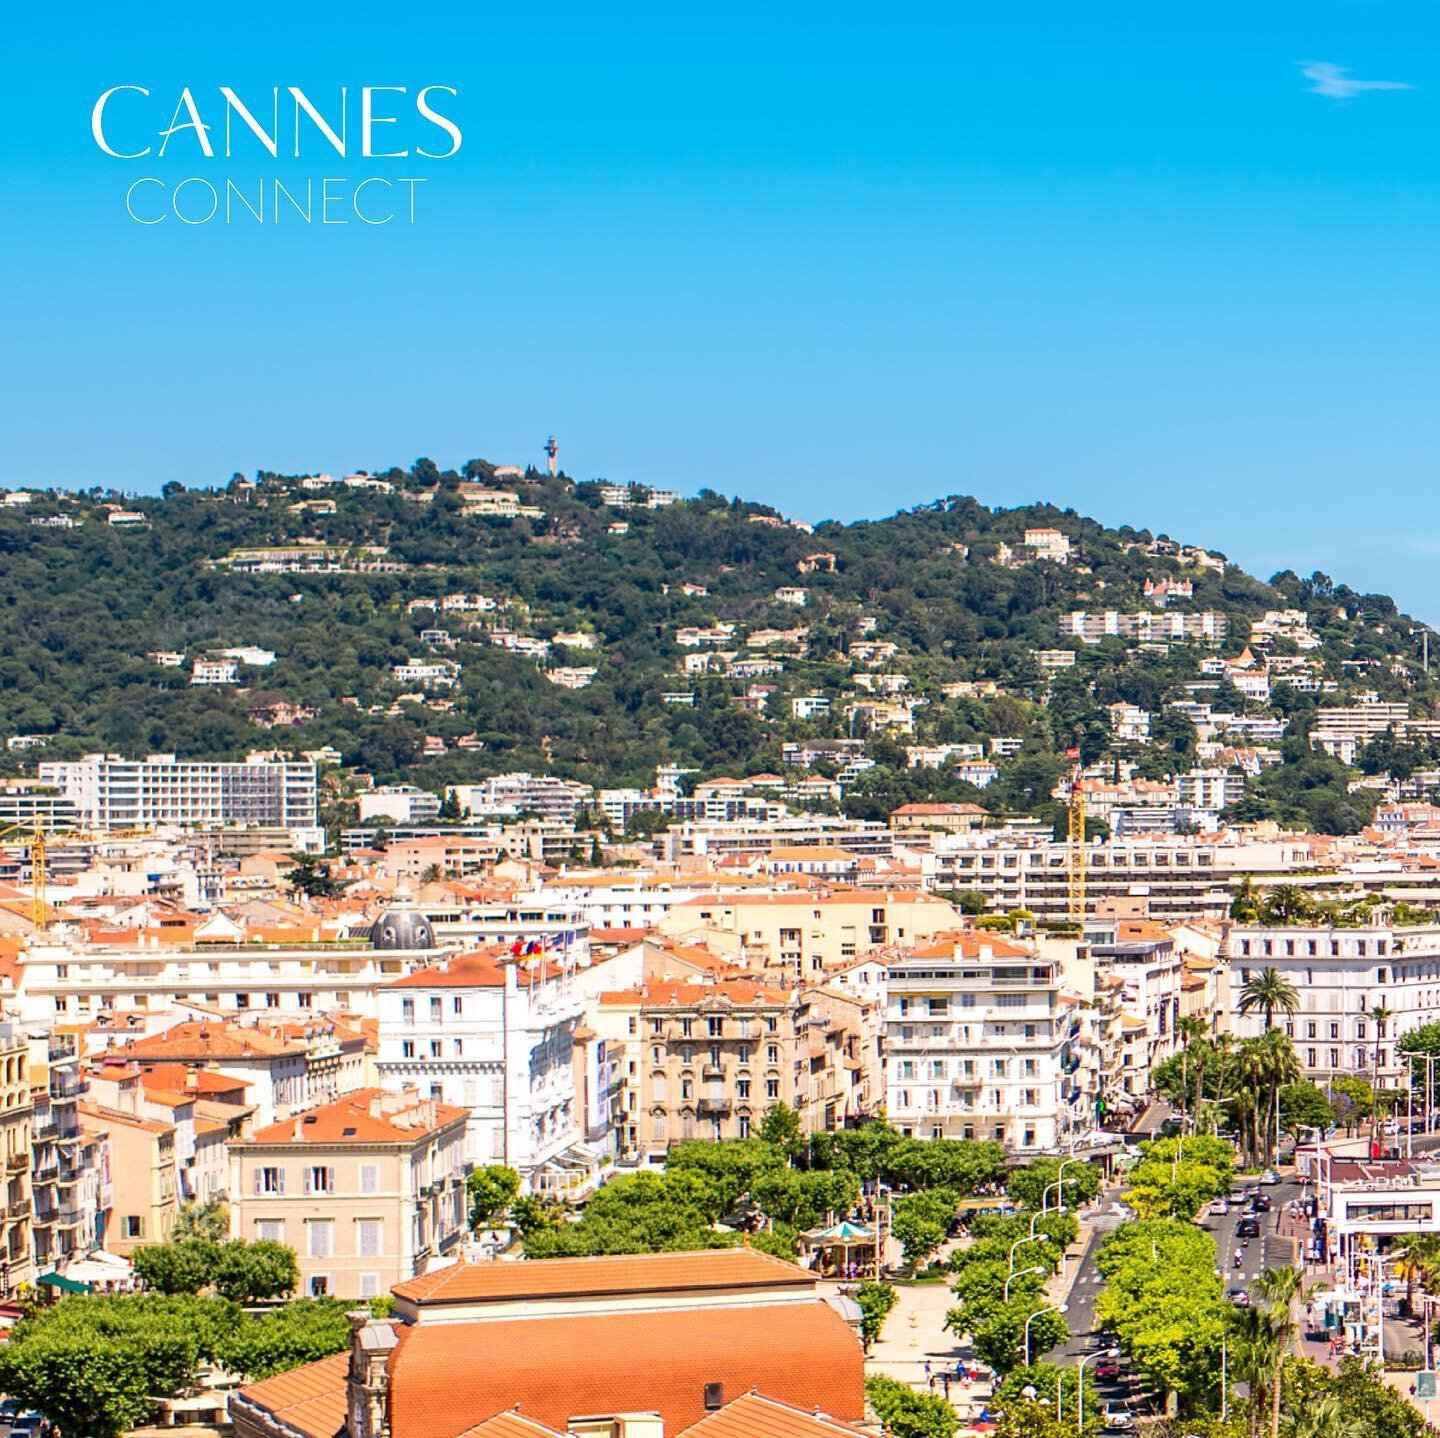 Cannes is more than just a tourist haven; it's a mosaic of local charm and vibrant life. With Cannes Connect, be ready to explore the true spirit of Cannes, where local businesses, iconic boutiques, and original personalities create the allure of thi